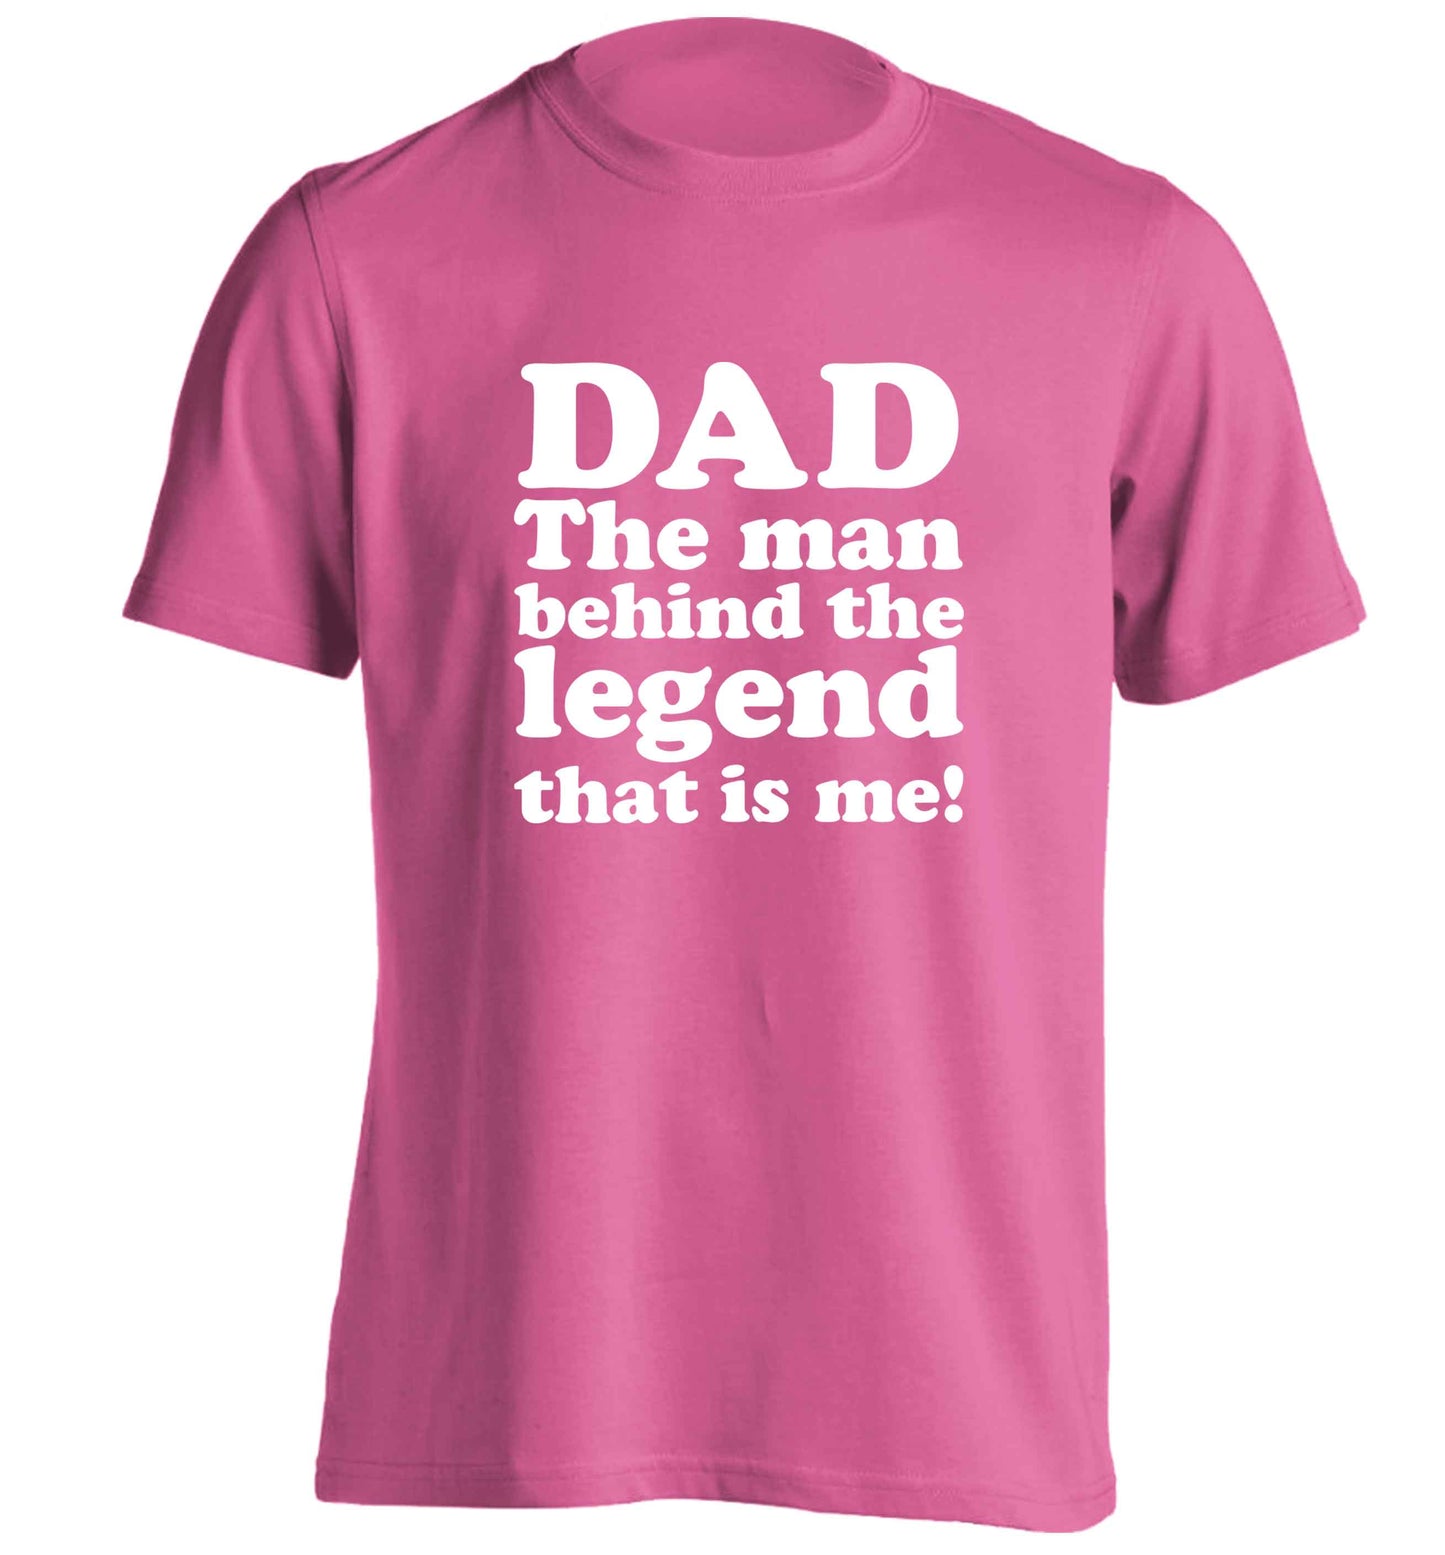 Dad the man behind the legend that is me adults unisex pink Tshirt 2XL